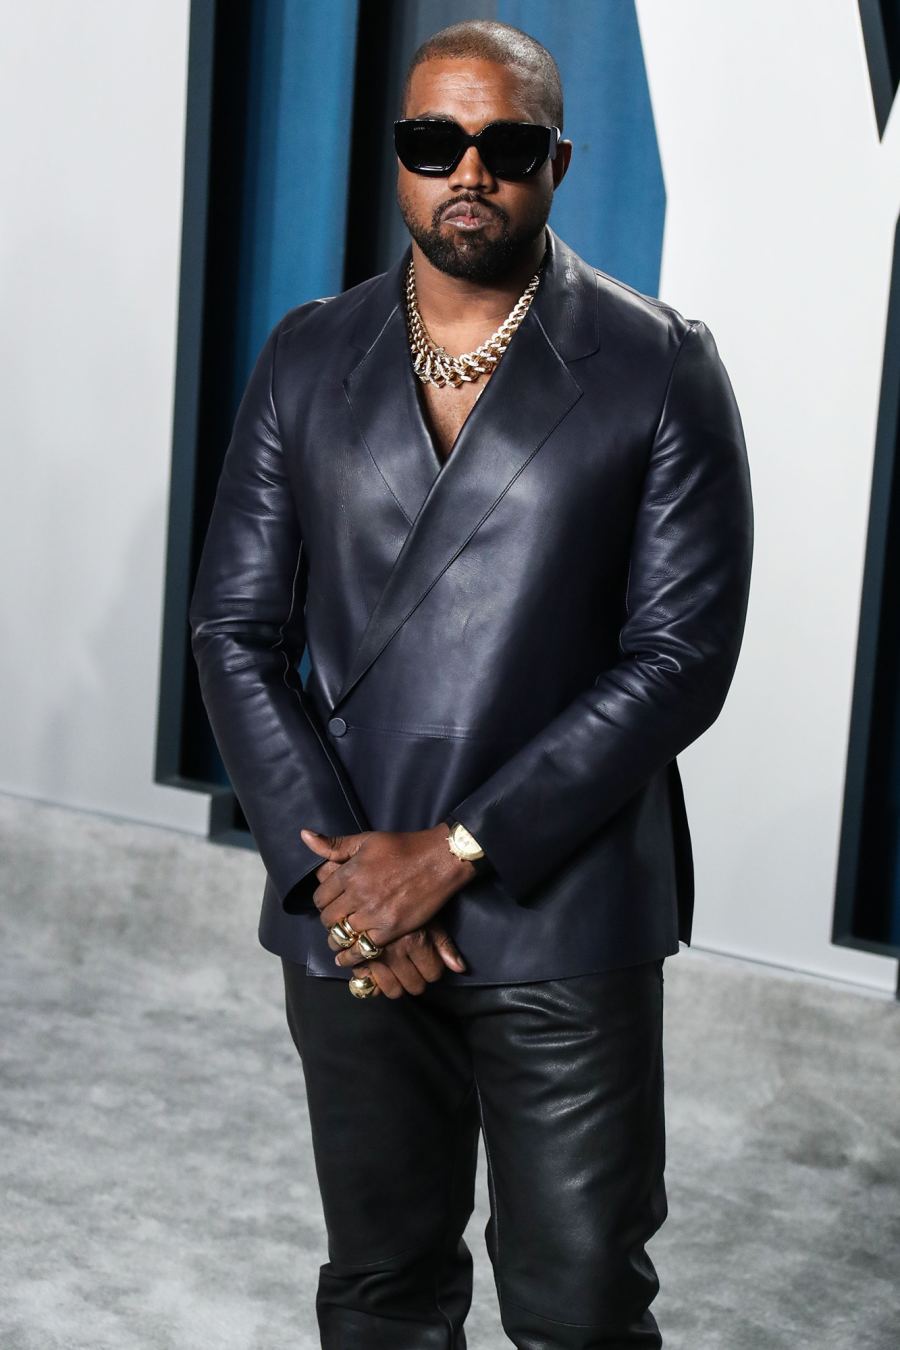 Kanye West banned at the Grammys